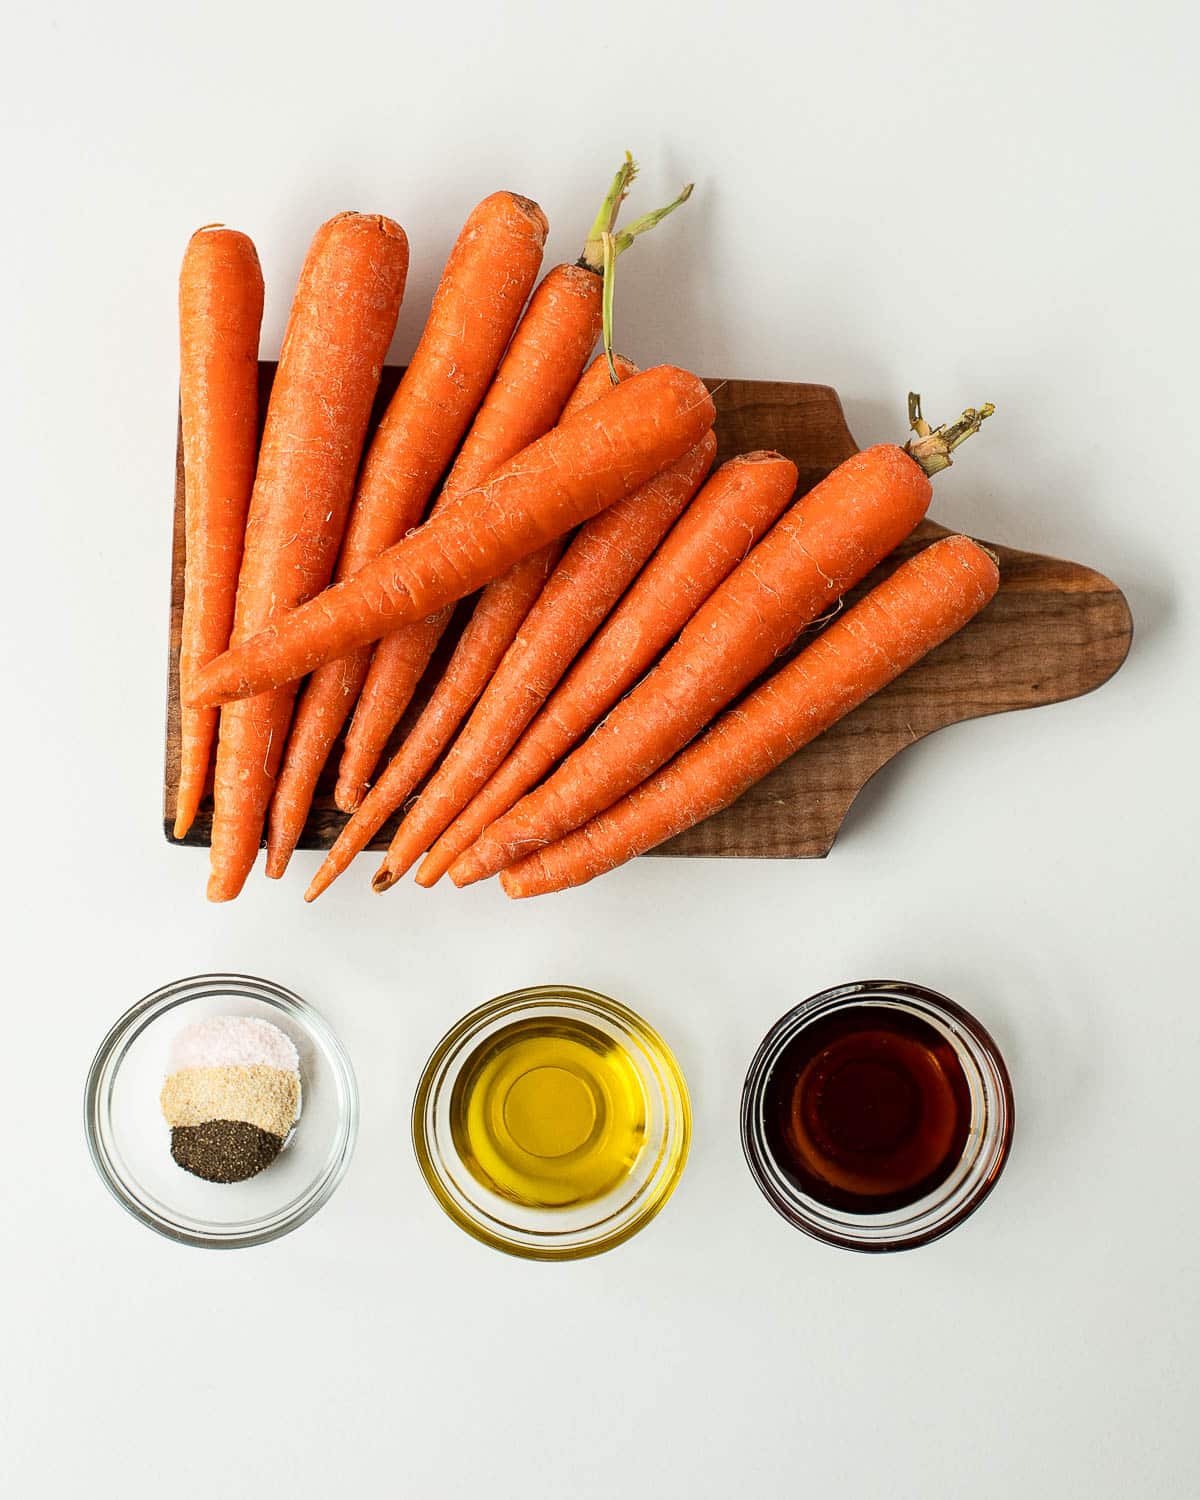 Simple ingredients you'll need for maple-glazed carrots